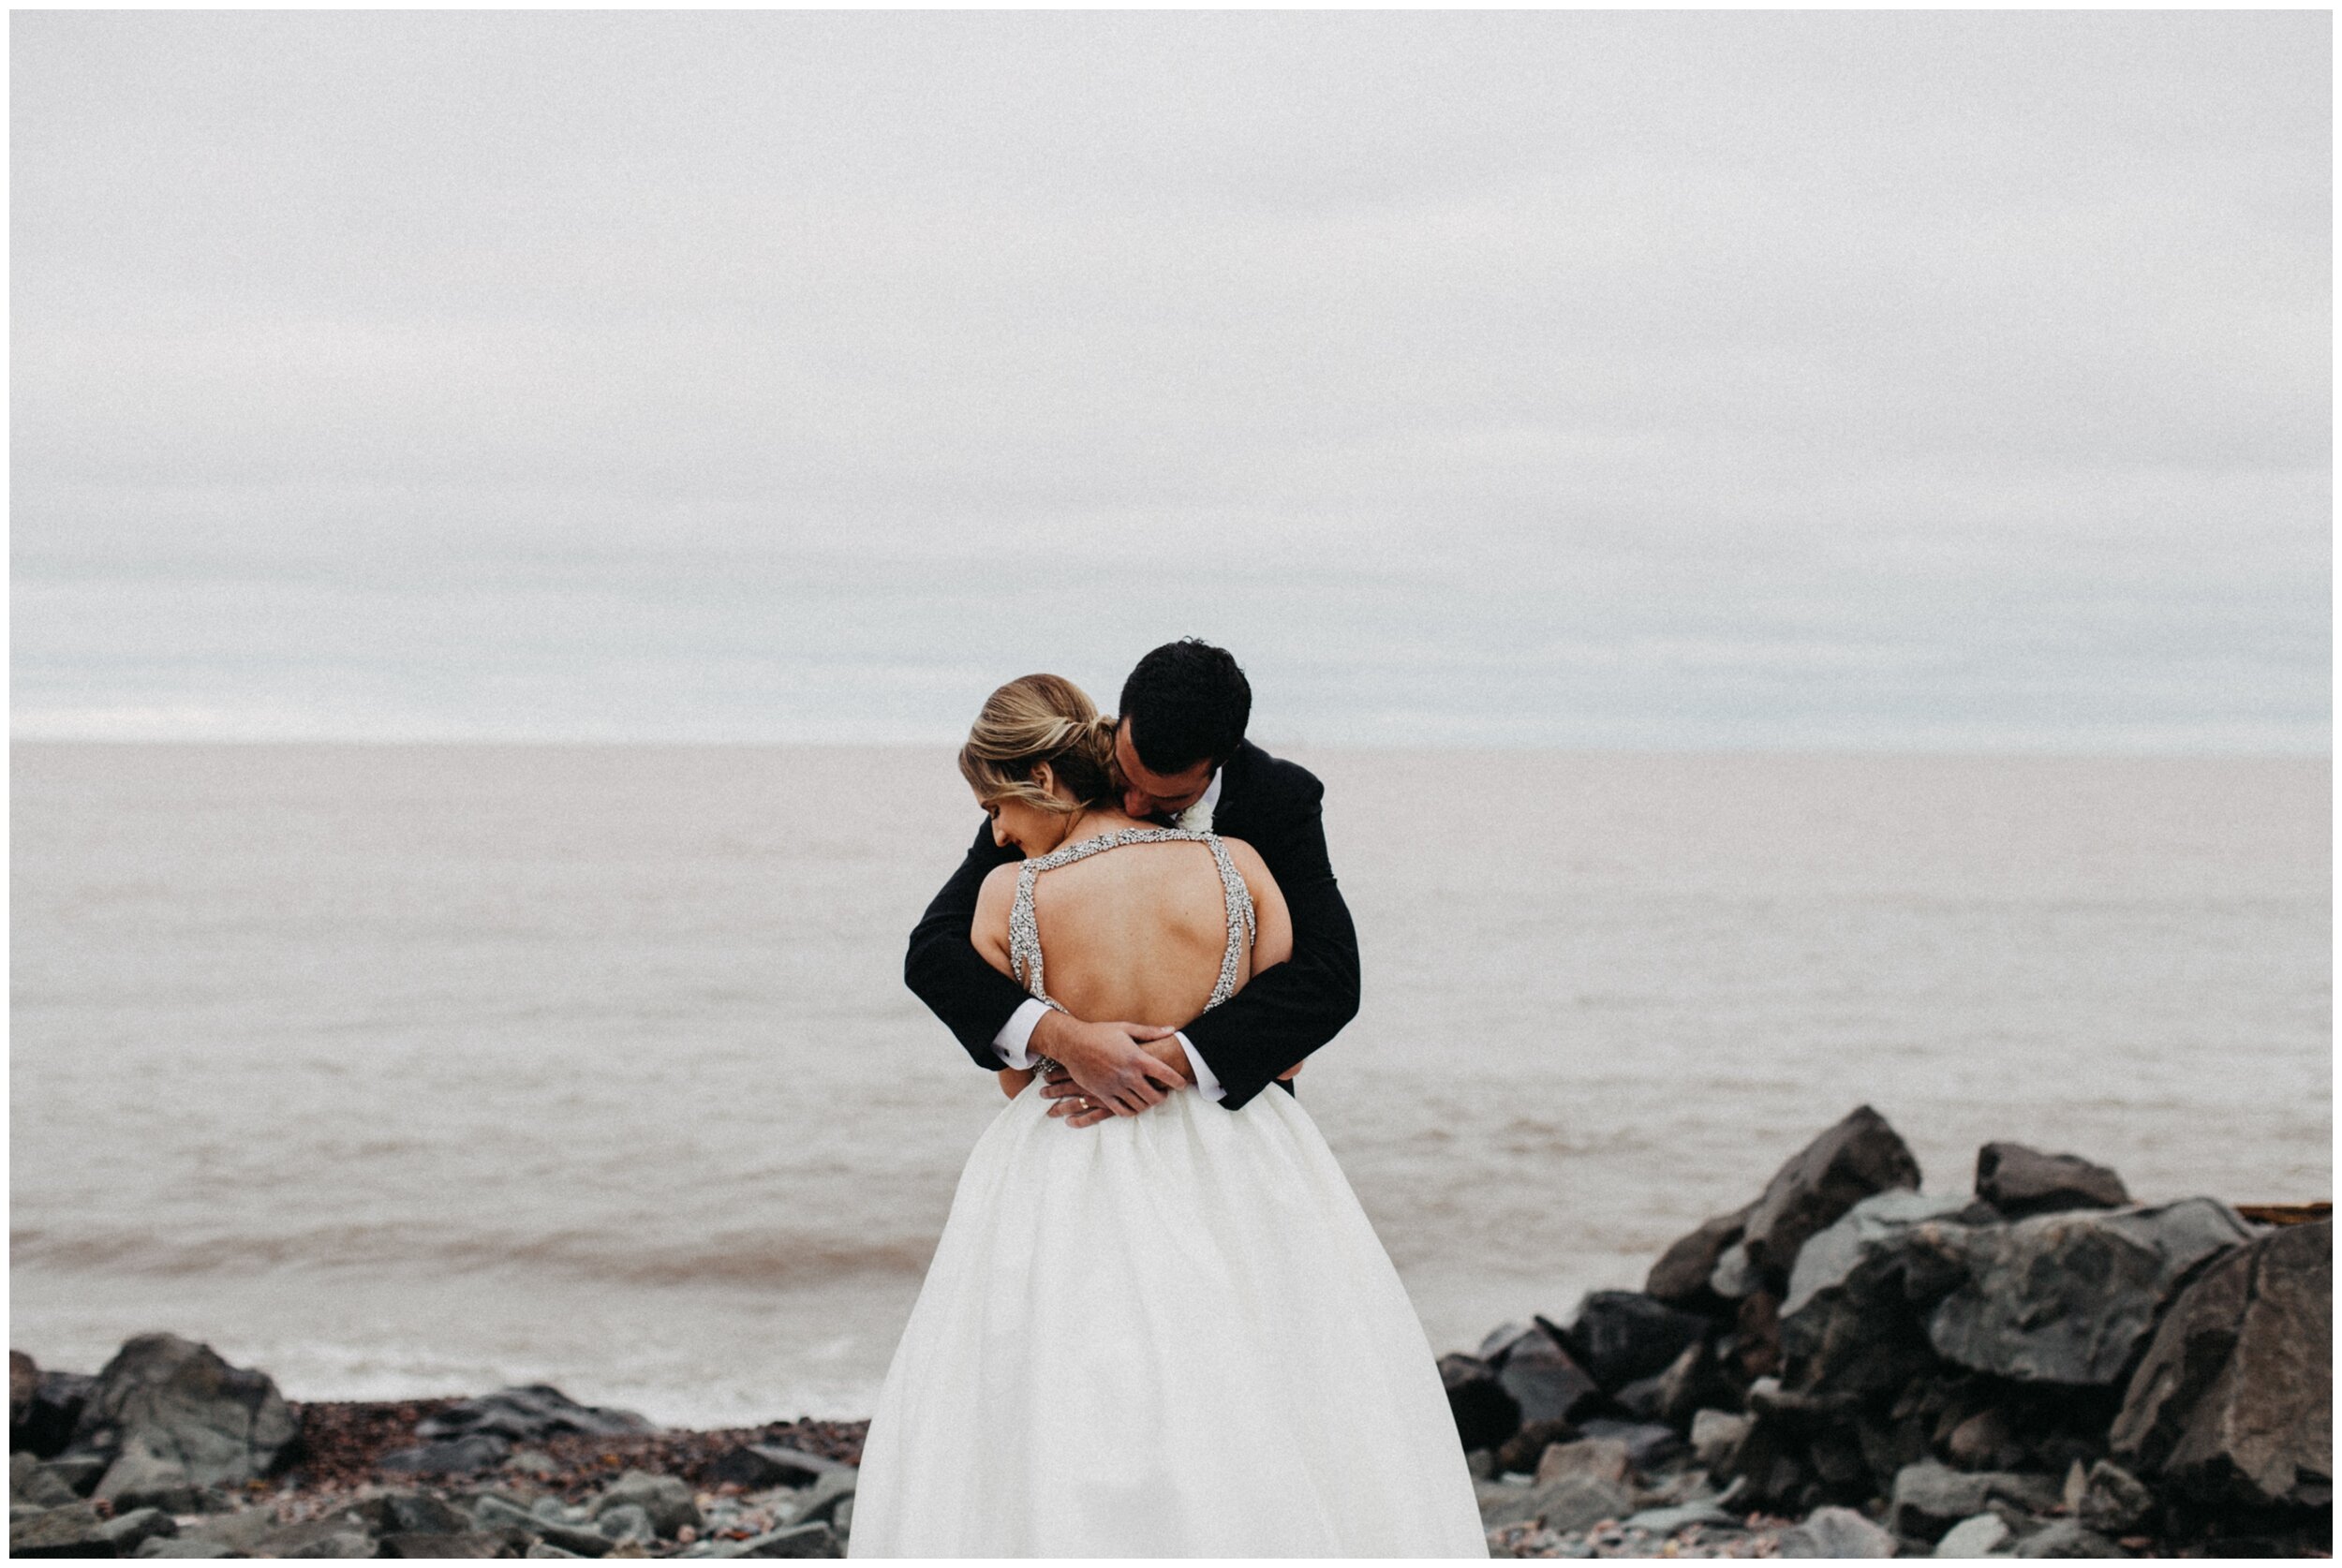 Bride and groom standing on rocks overlooking lake superior in Duluth, Minnesota